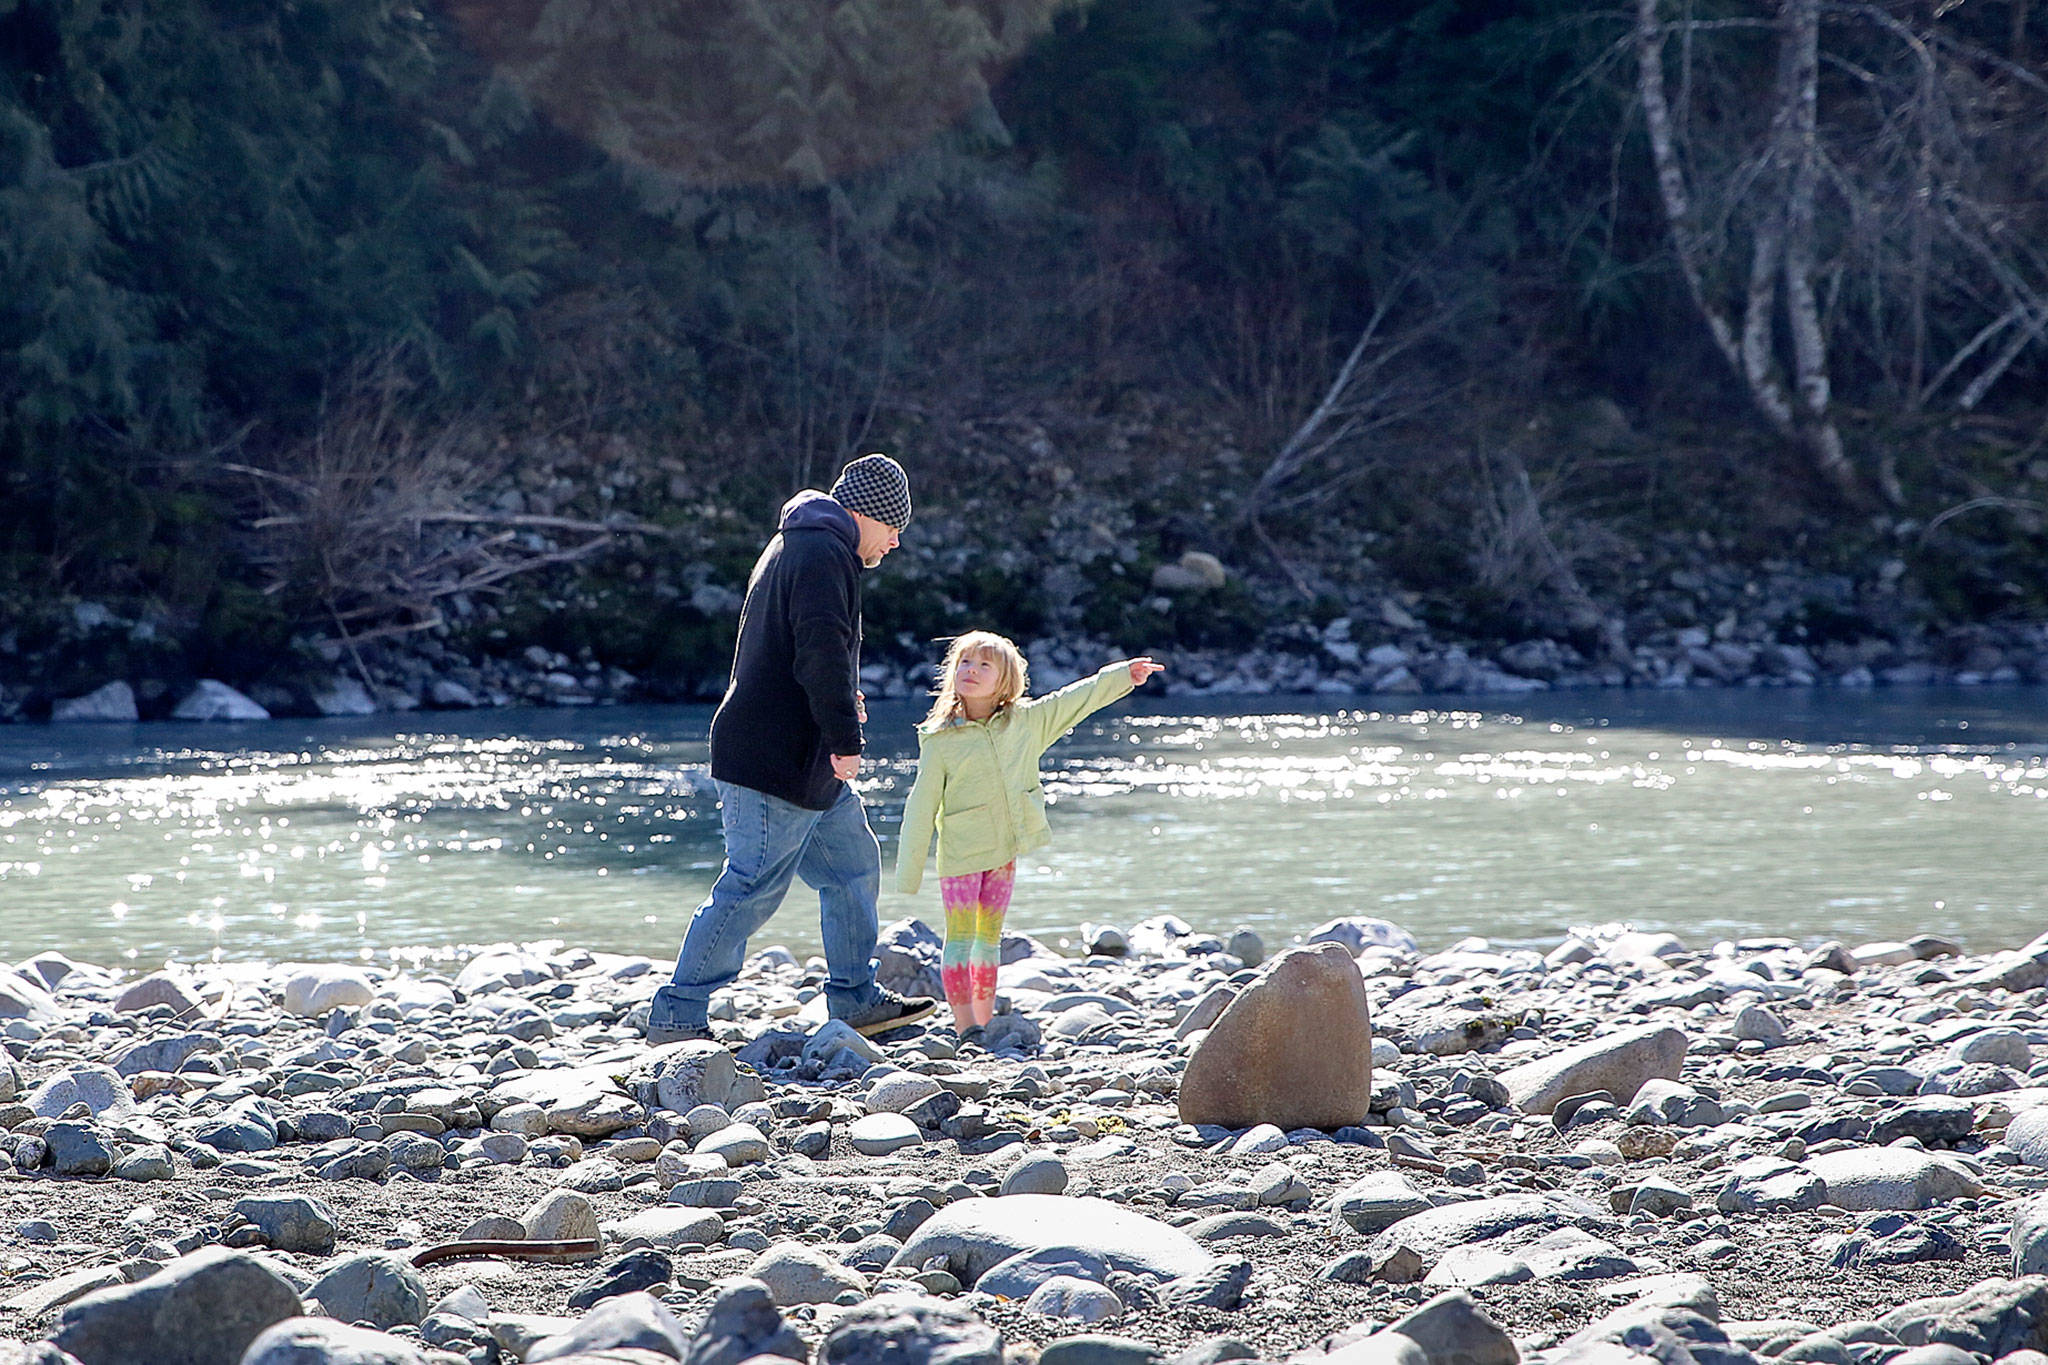 Jesse Miller and his daughter Roselyn Hunt, 6, browse the banks of the South Fork Stillaguamish River off Jordan Road outside Arlington for gems and other precious medals. Miller, an amateur prospector, says, “There’s gold in dem dar hills.” Sunday afternoon on March 3, 2019. (Kevin Clark / The Herald)